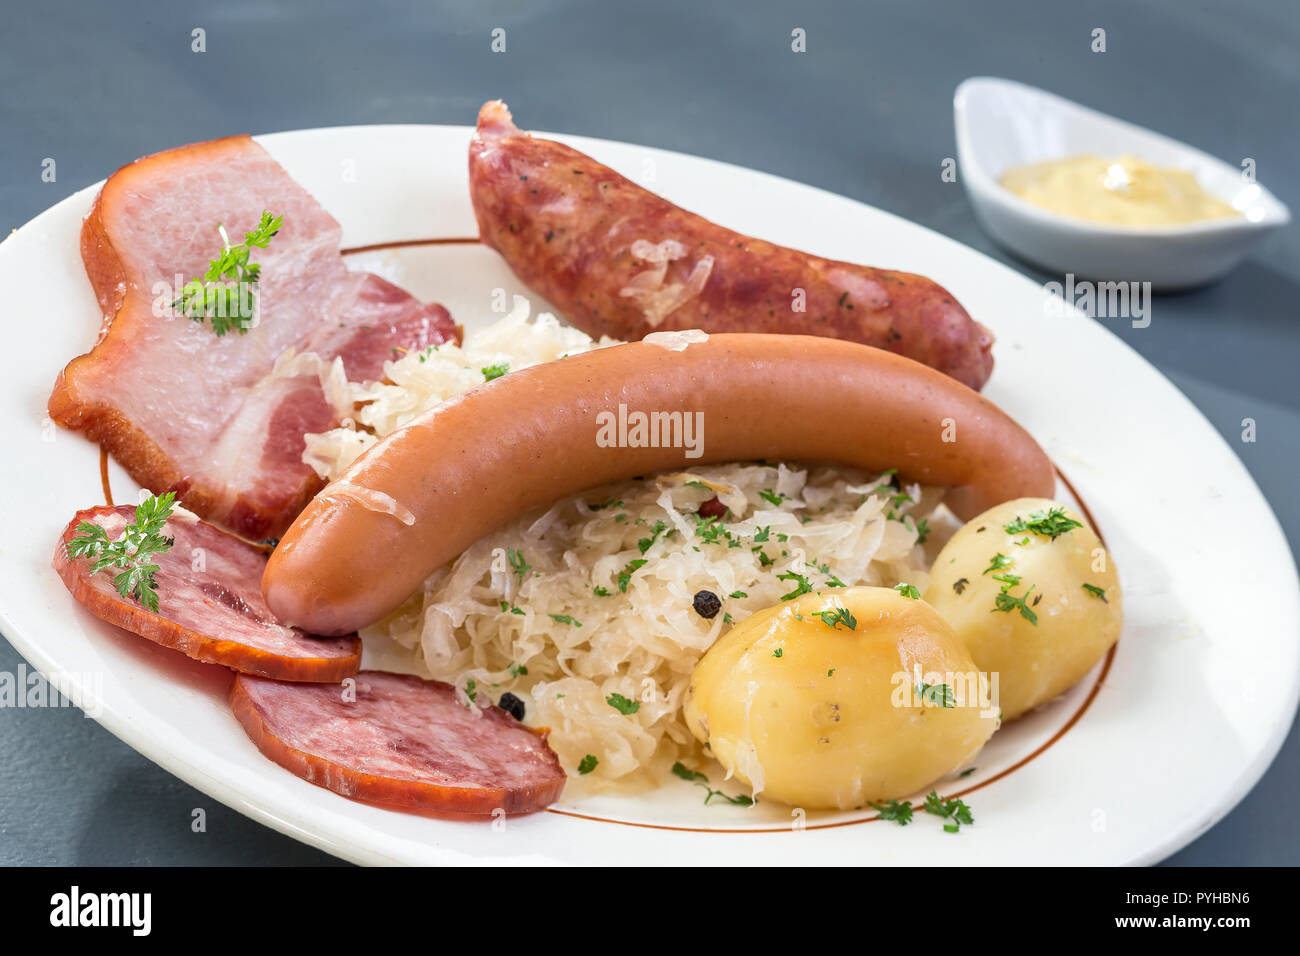 Choucroute garnie, a typical alsacian plate, with sausages, bacon, sauerkraut and potatoes Stock Photo